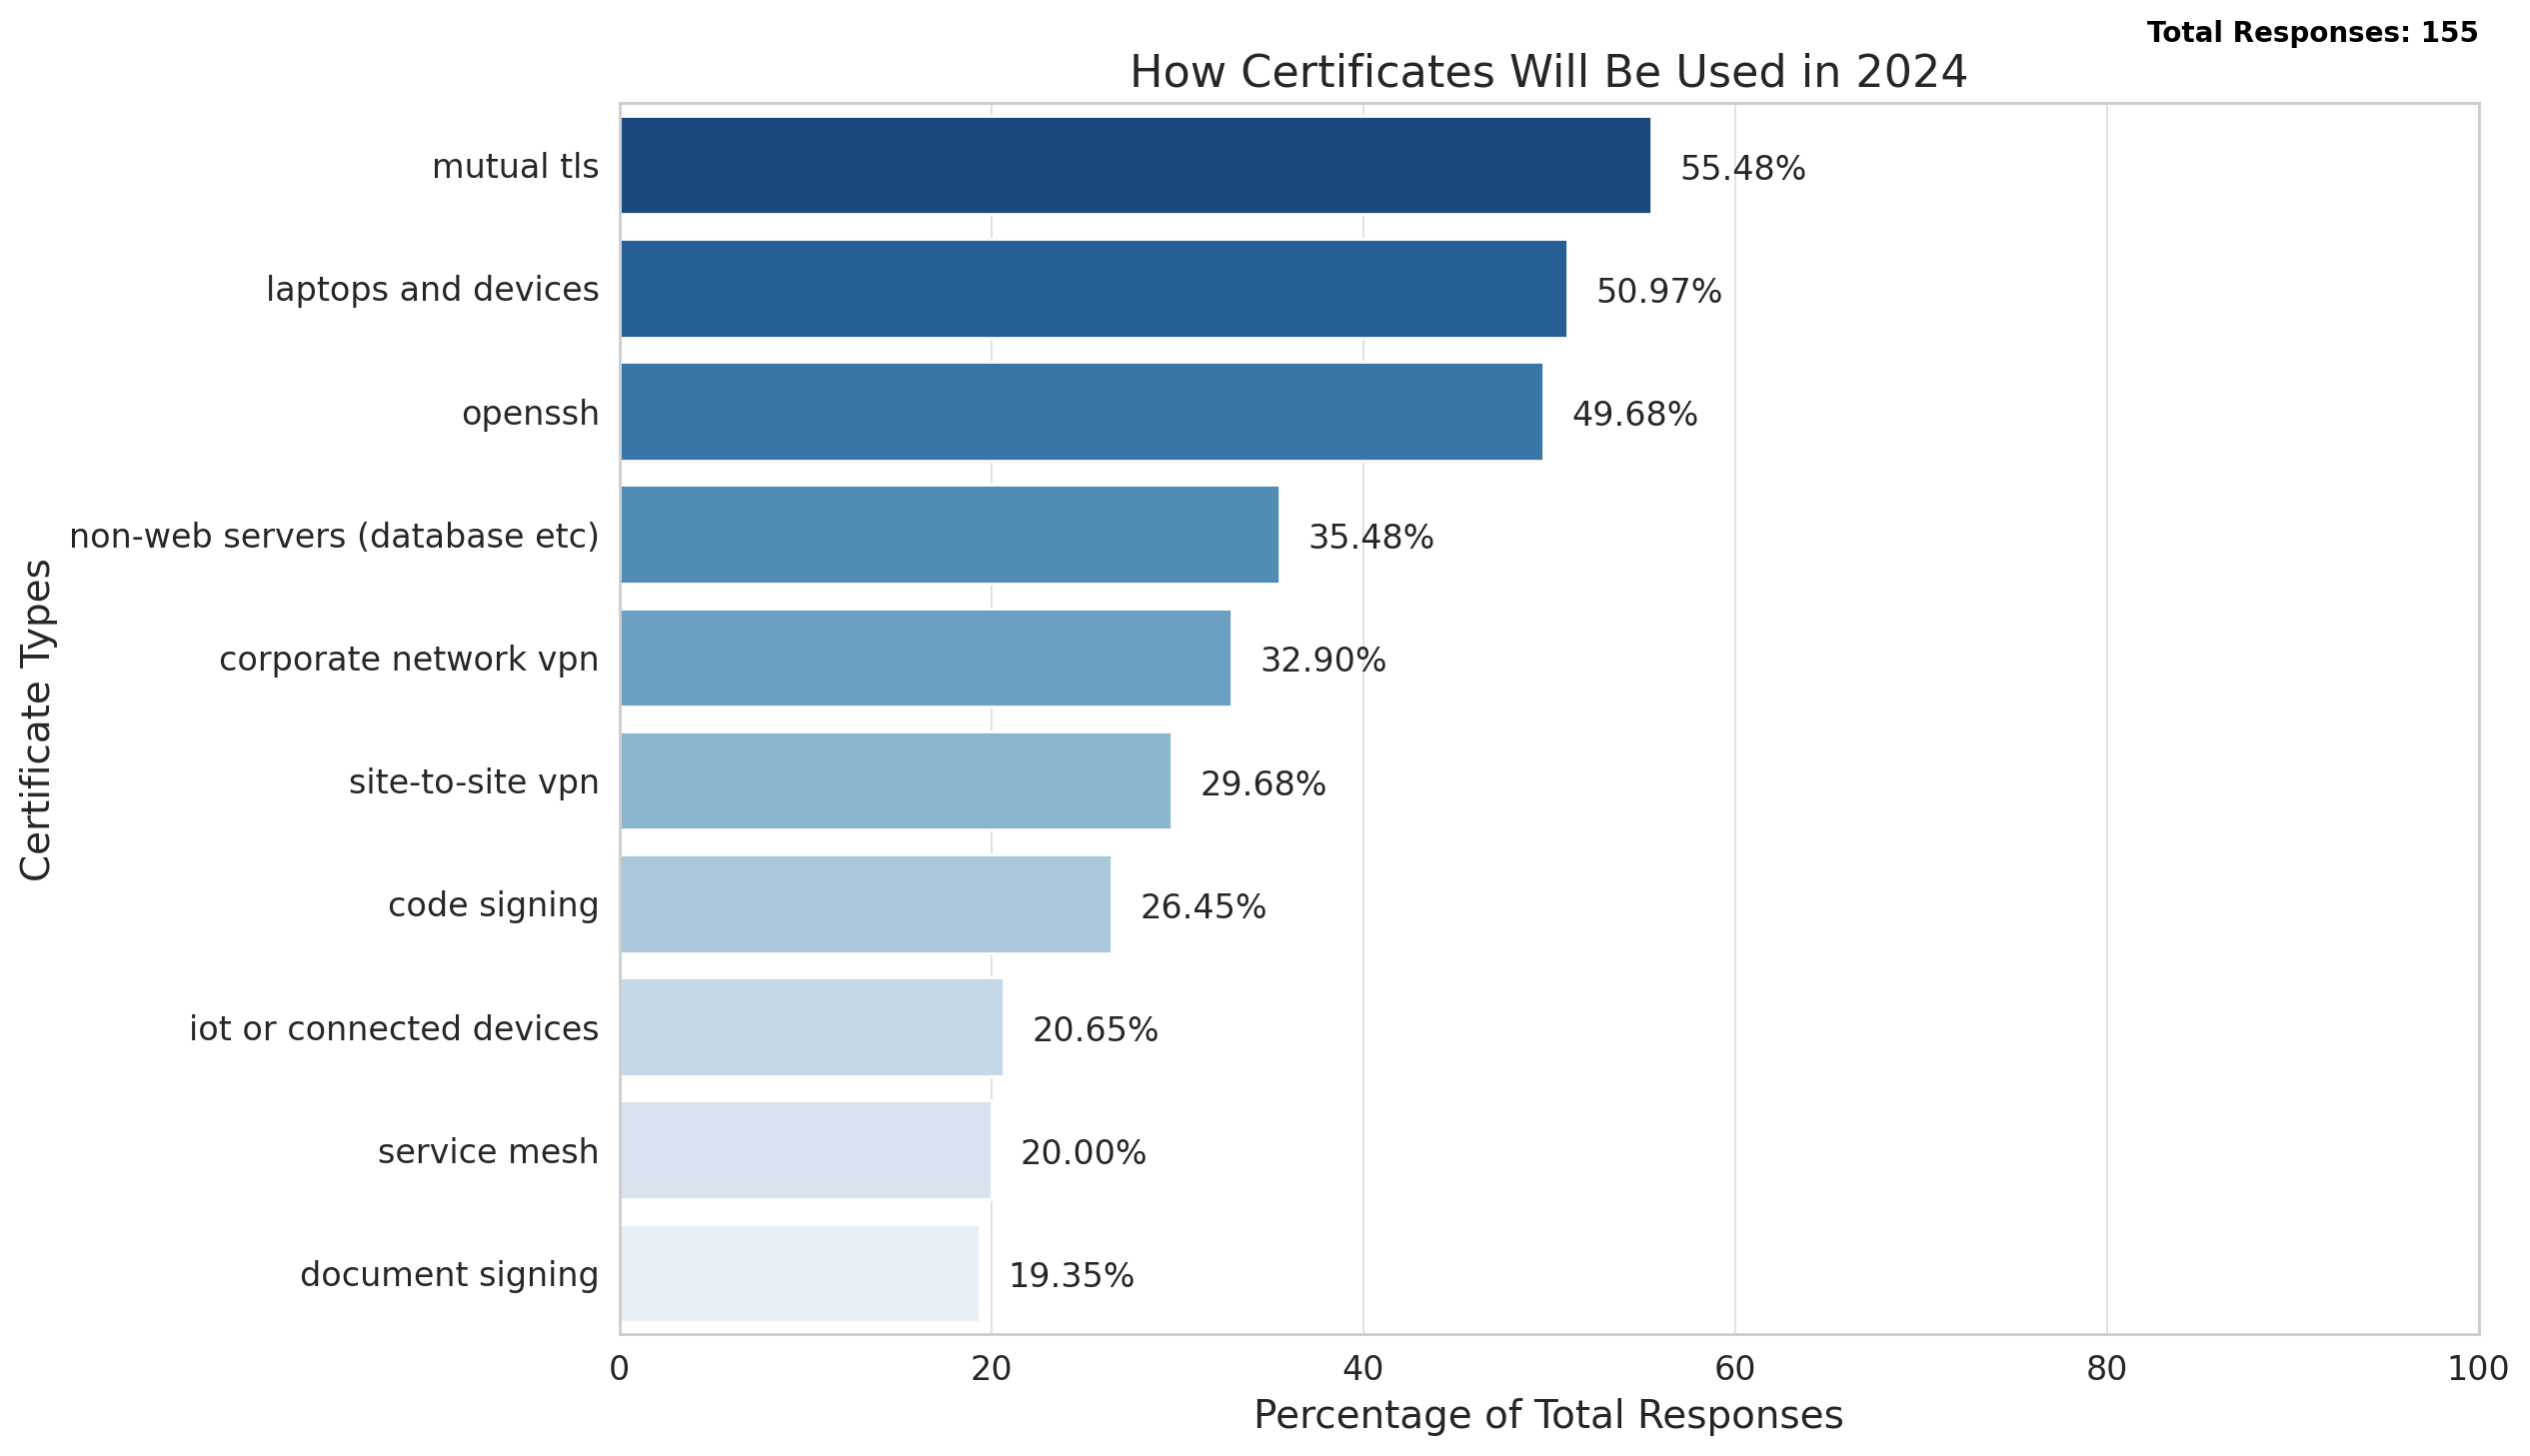 How Certificates Will Be Used in 2024